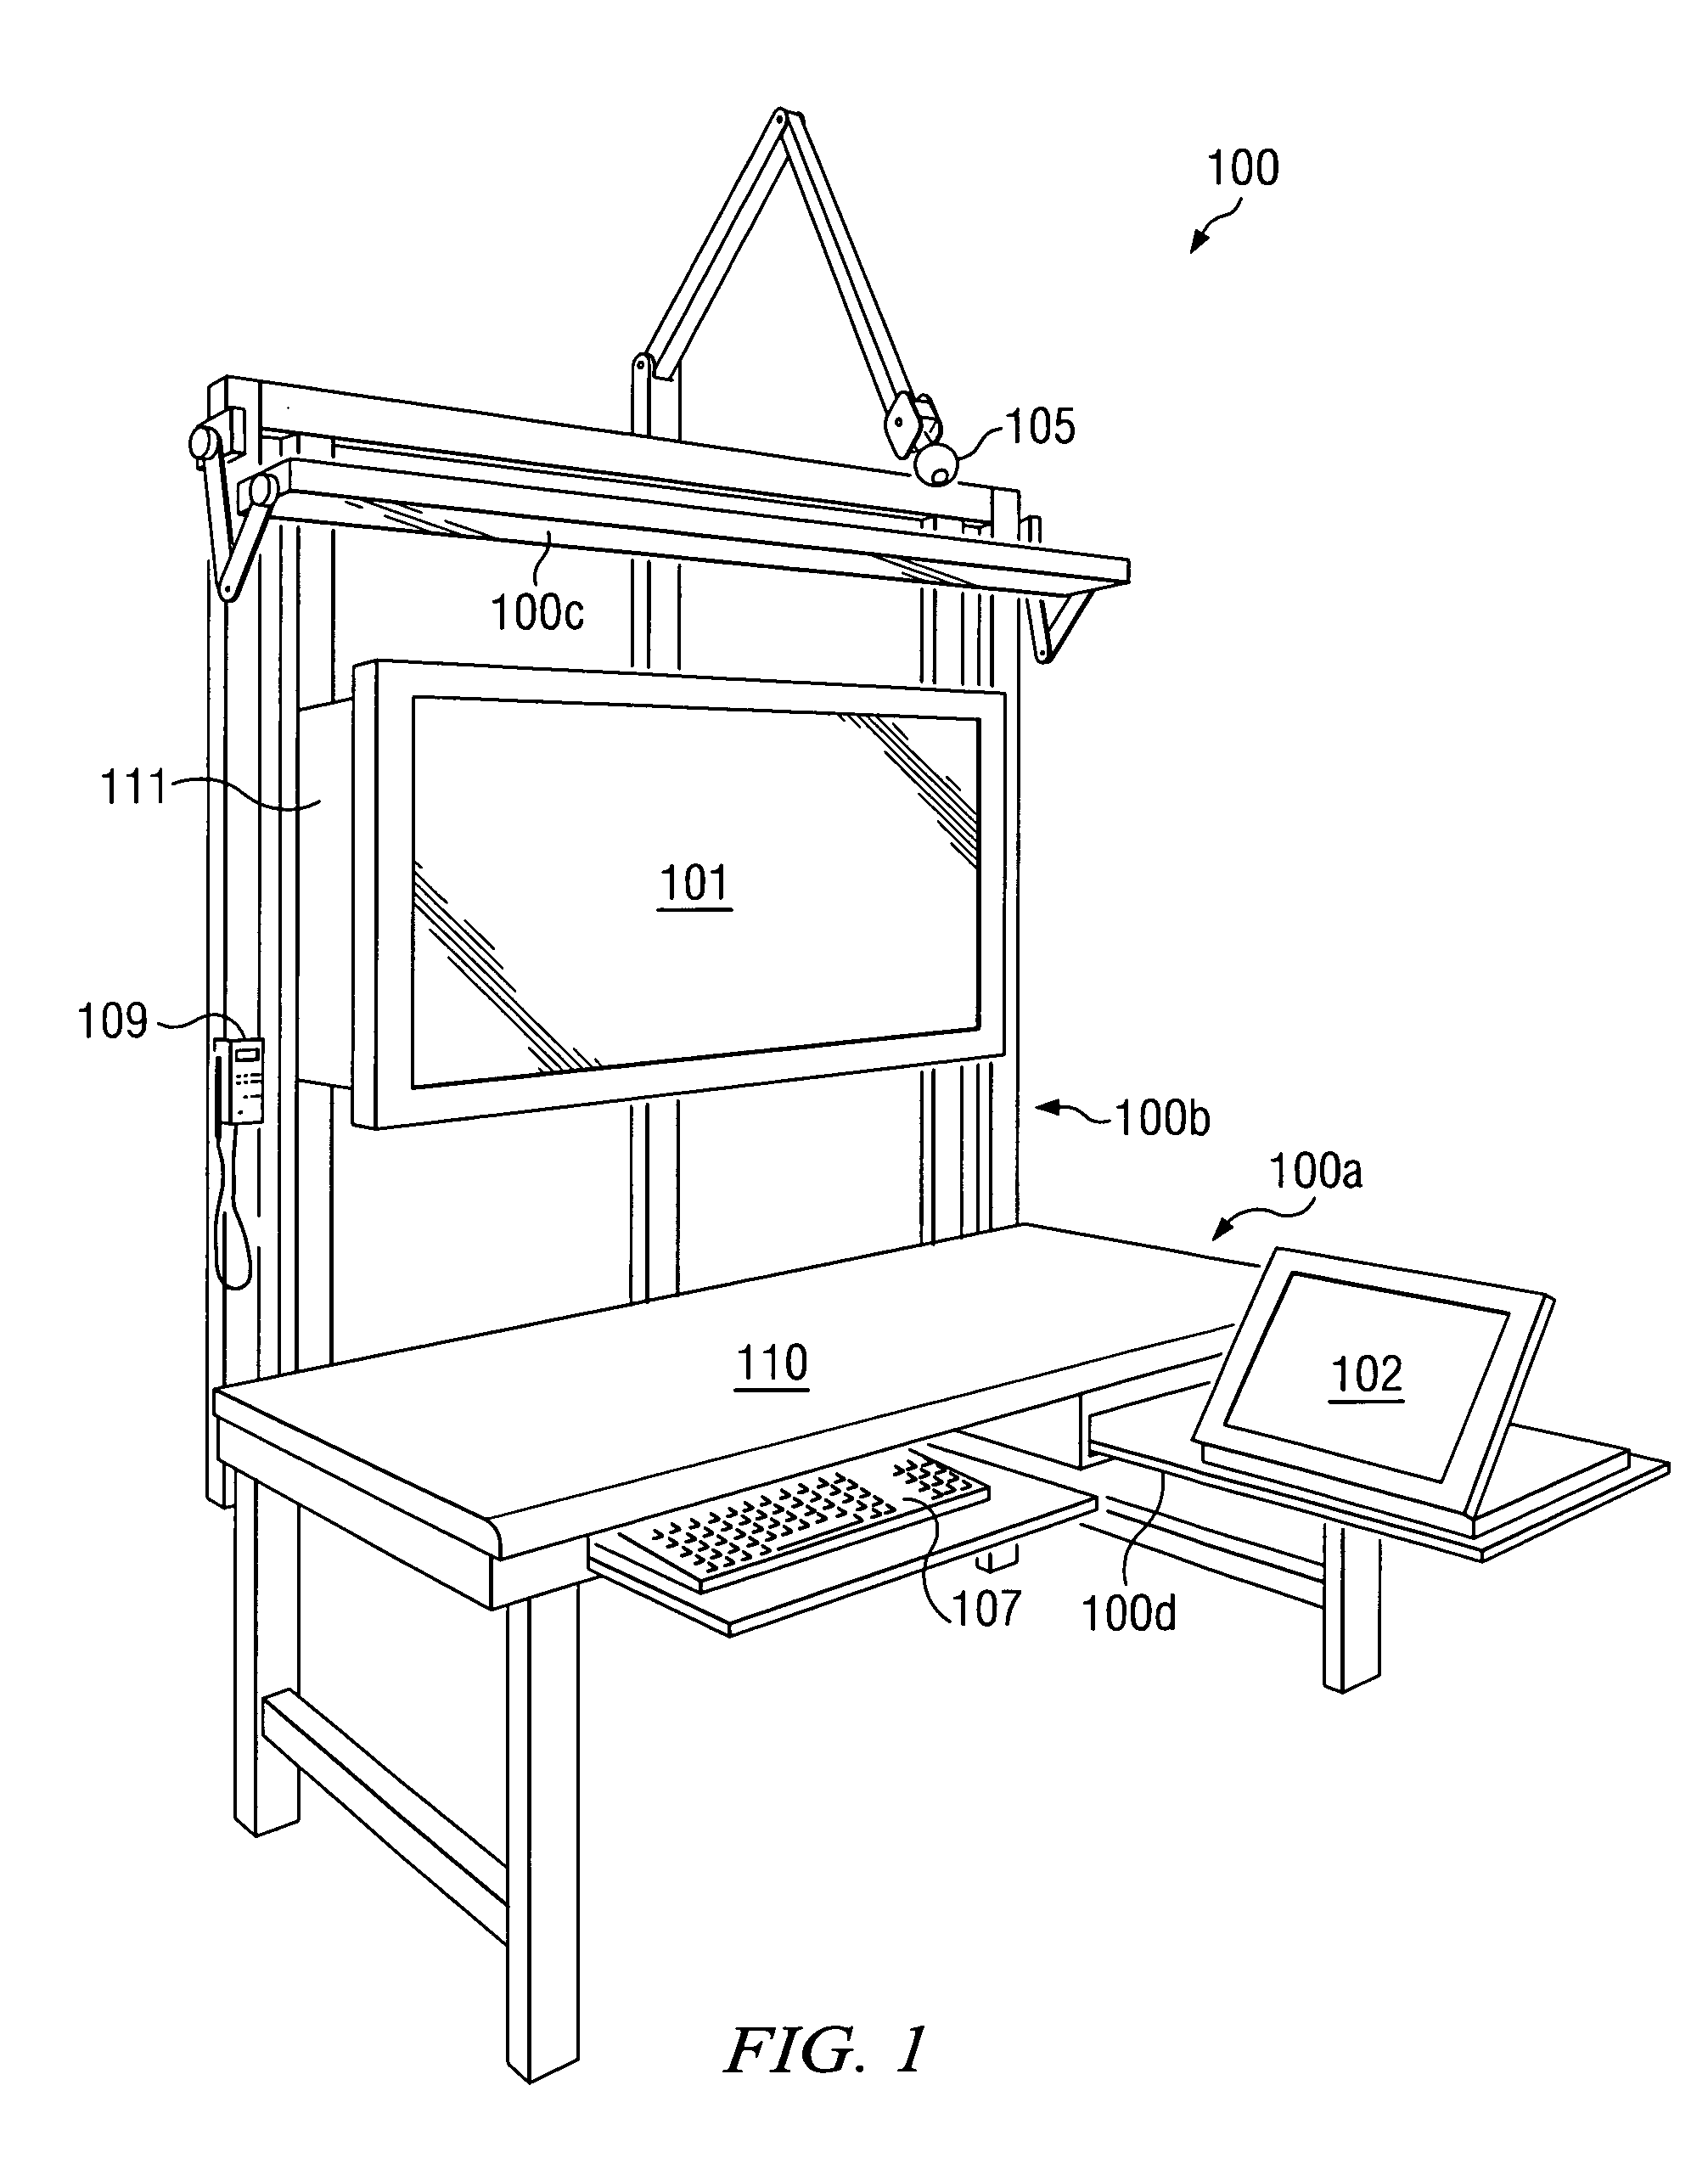 Industrial Workbench with Digital Input, Output, Processing, and Connectivity Devices